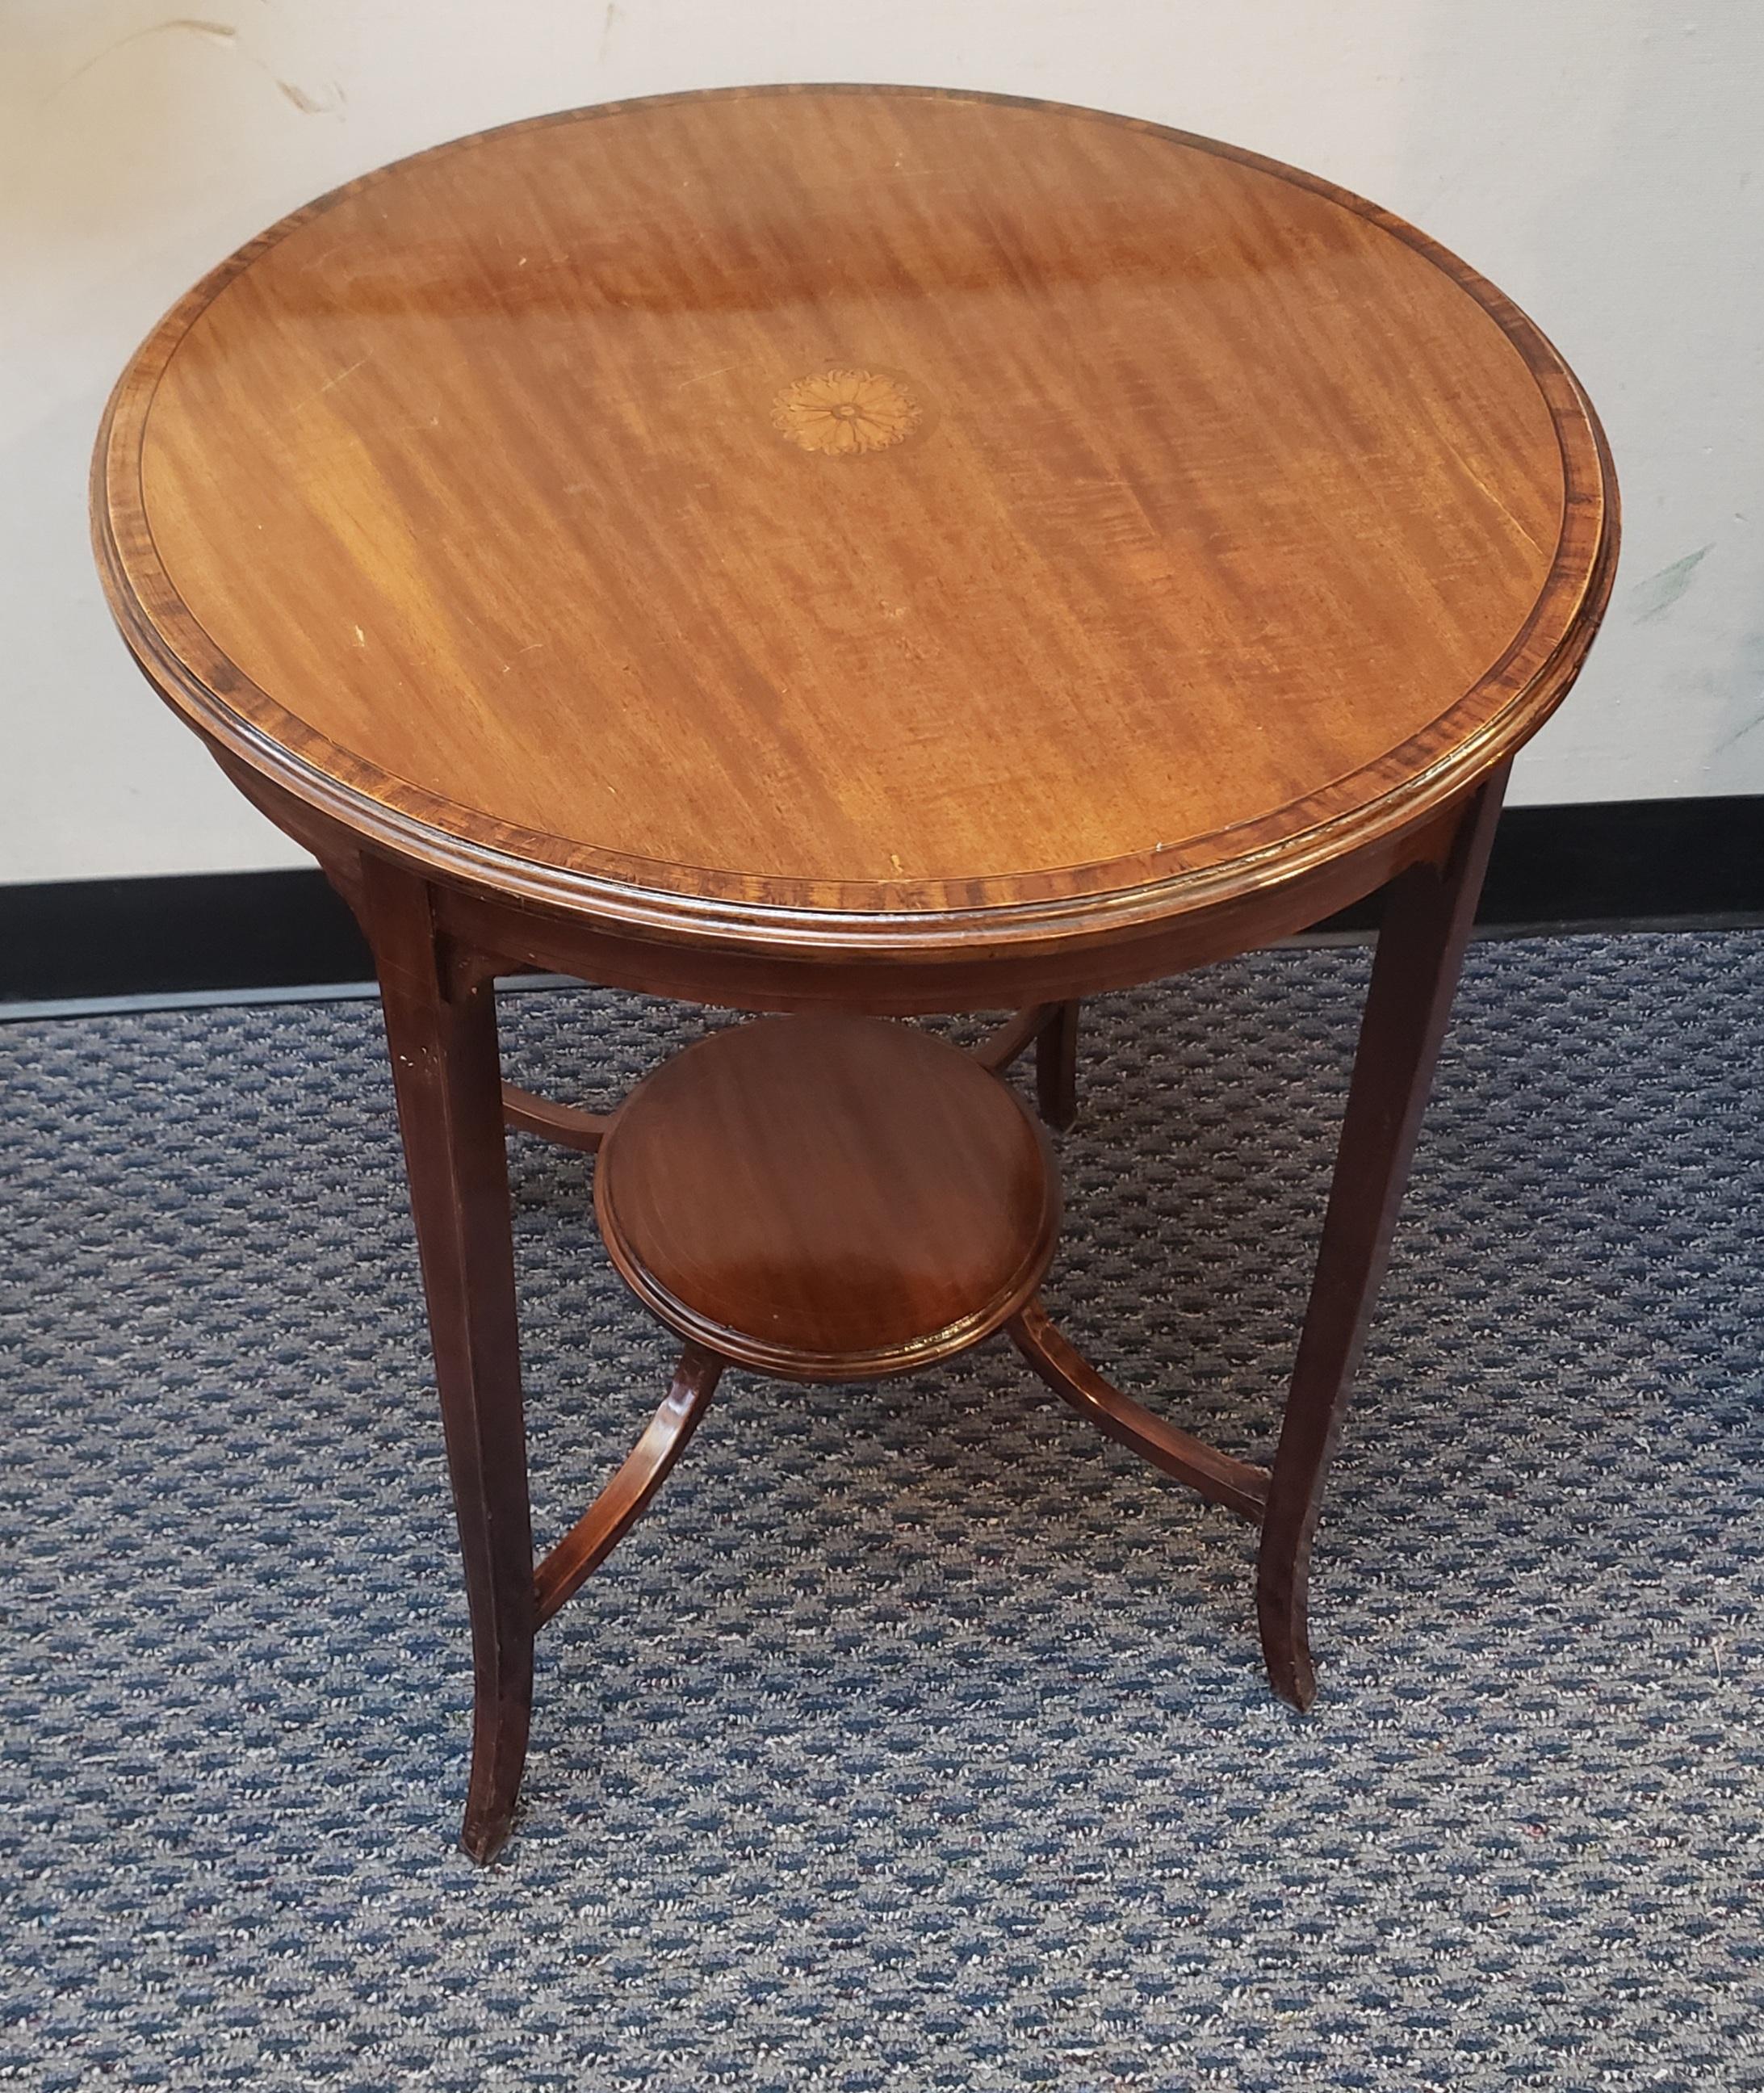 An exquisite George III Style Inlaid Mahogany center table or Side Table with lower tier stretcher joining the the 4 legs for a great stabilty. 